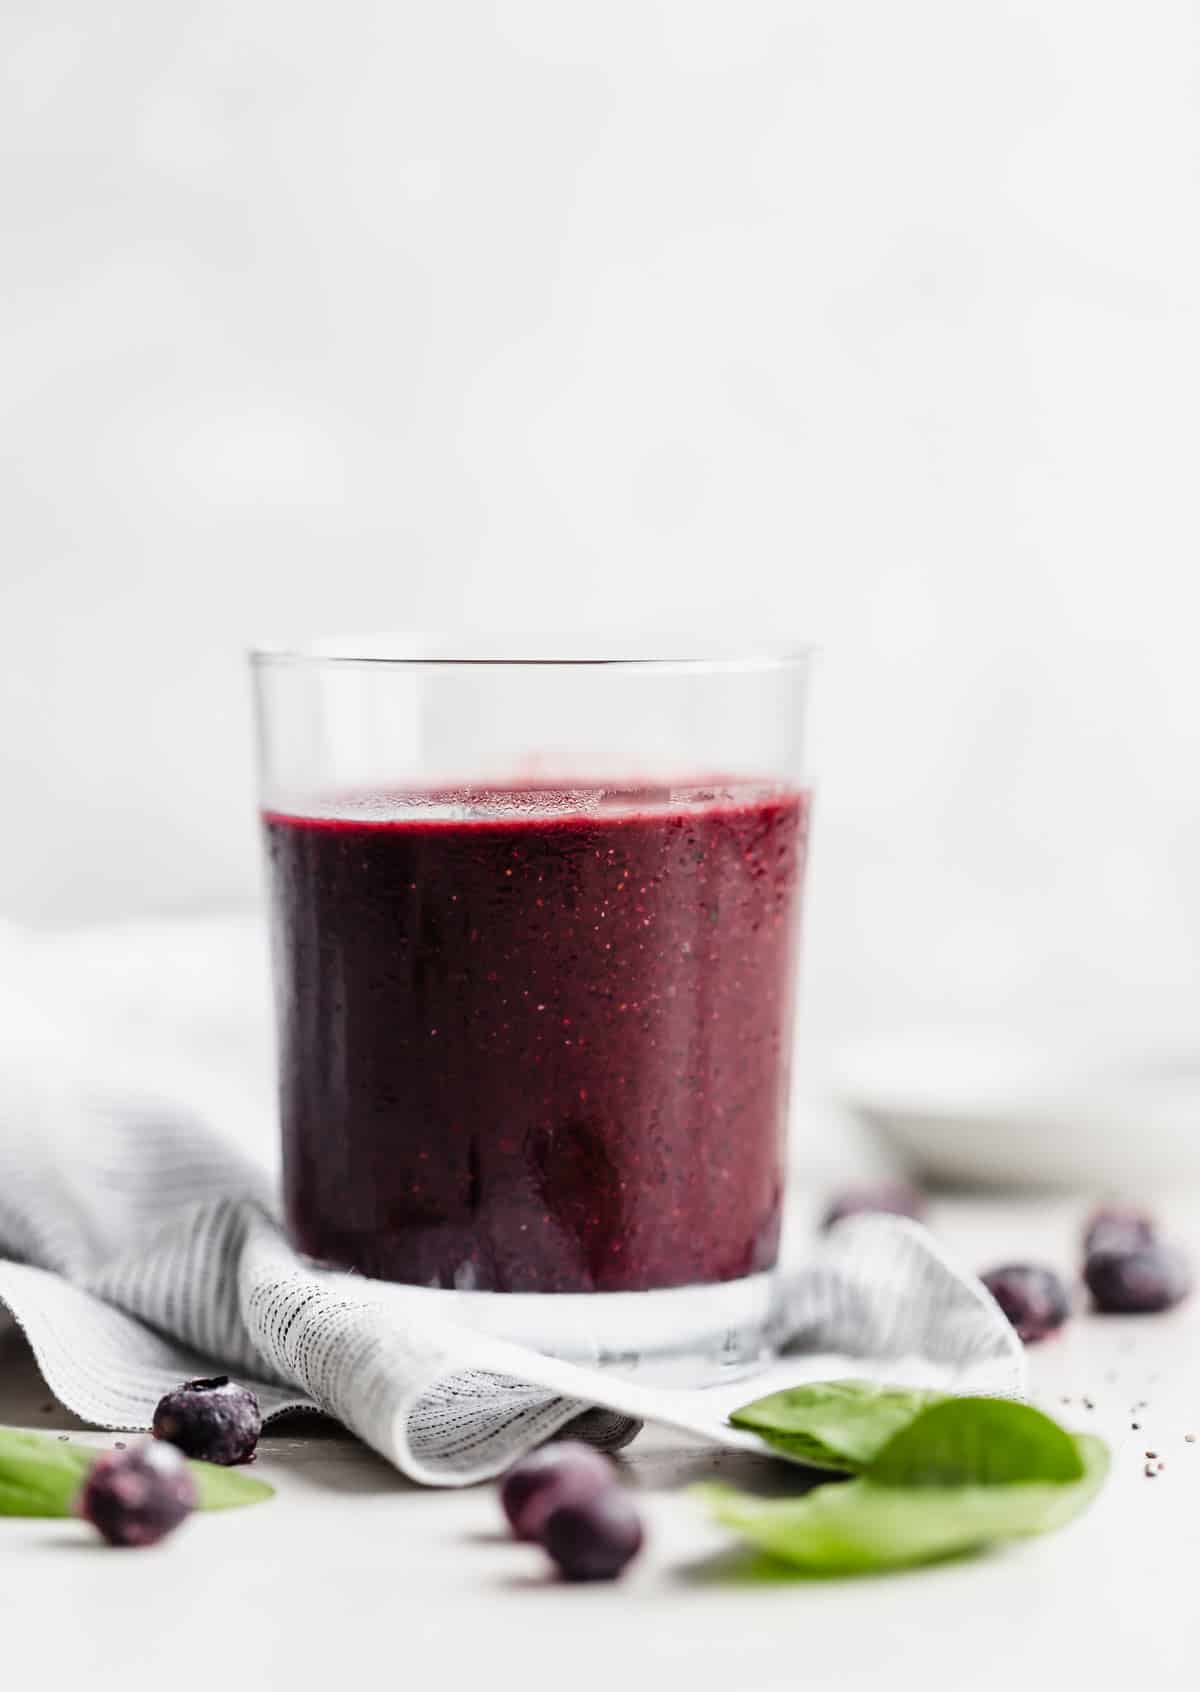 Dark purple Acai Smoothie in a clear glass against a white background.